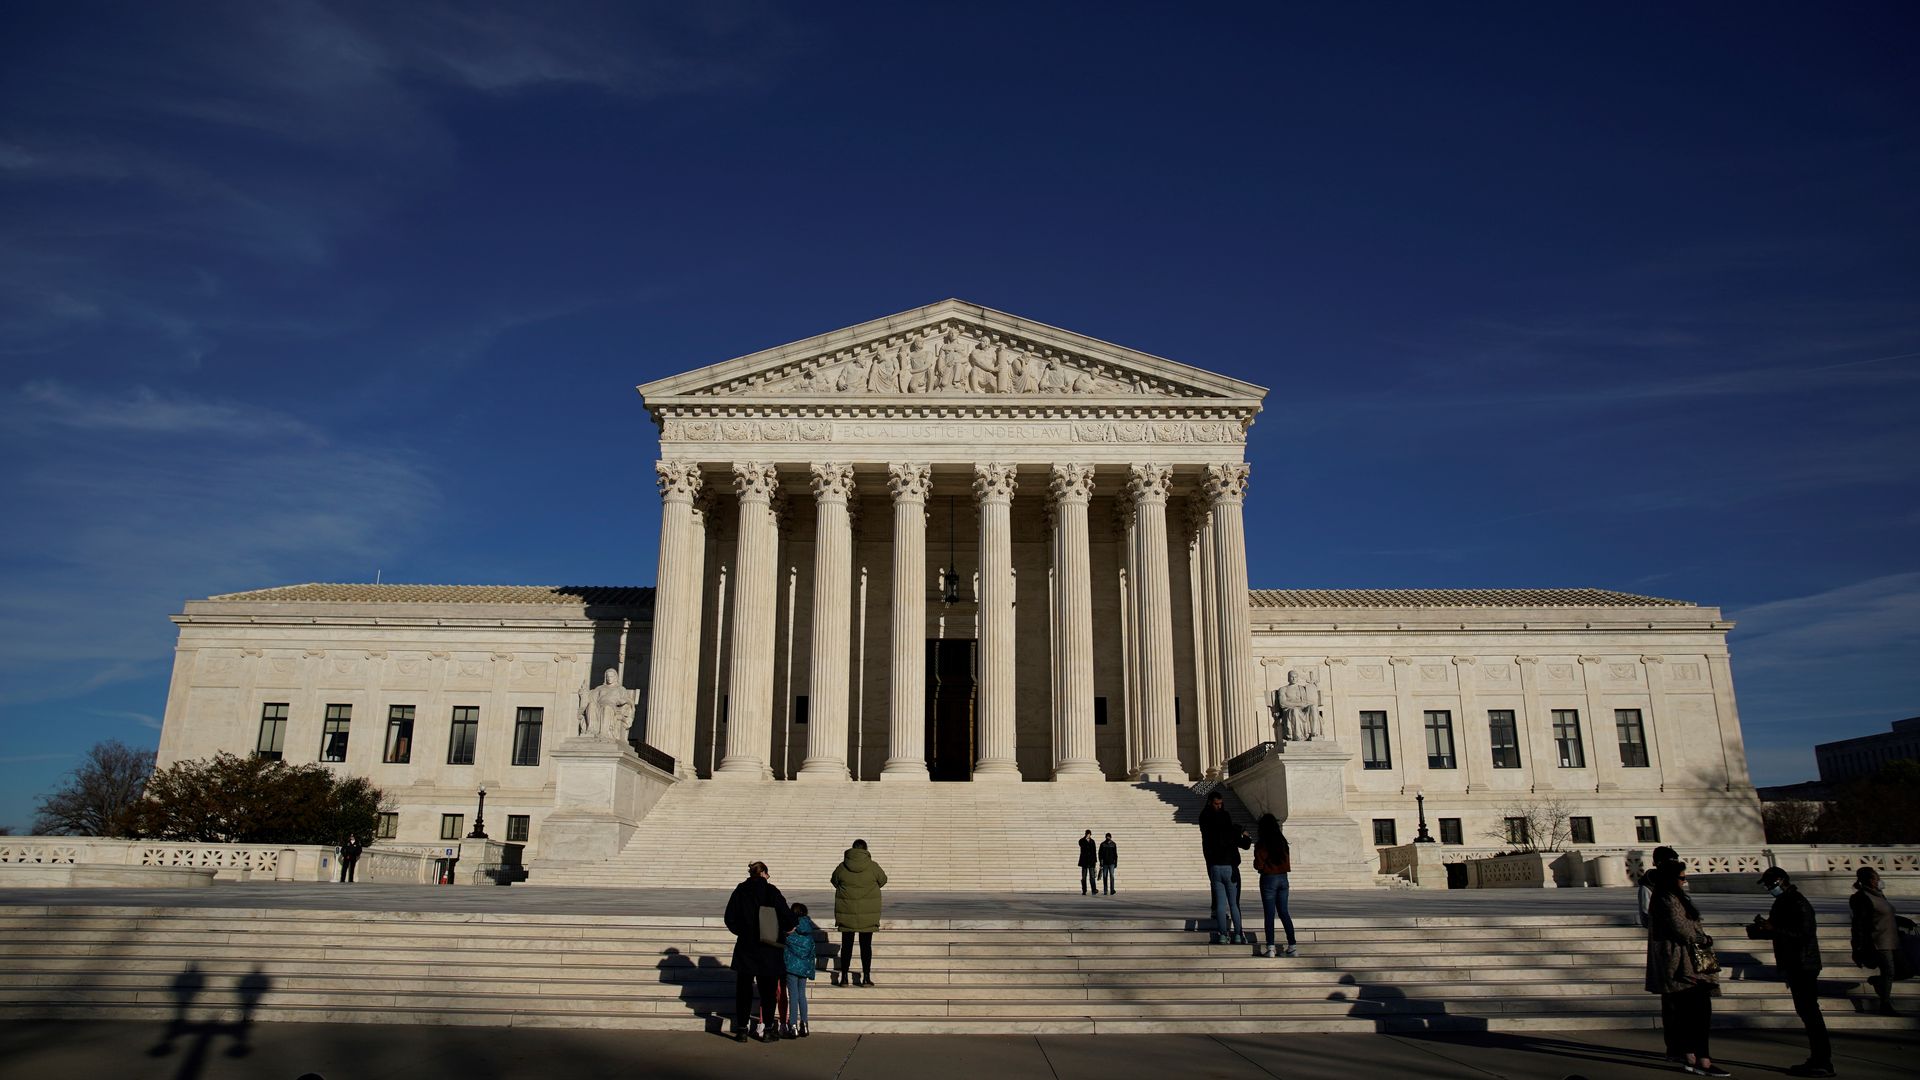 Photo of the Supreme Court building from the front